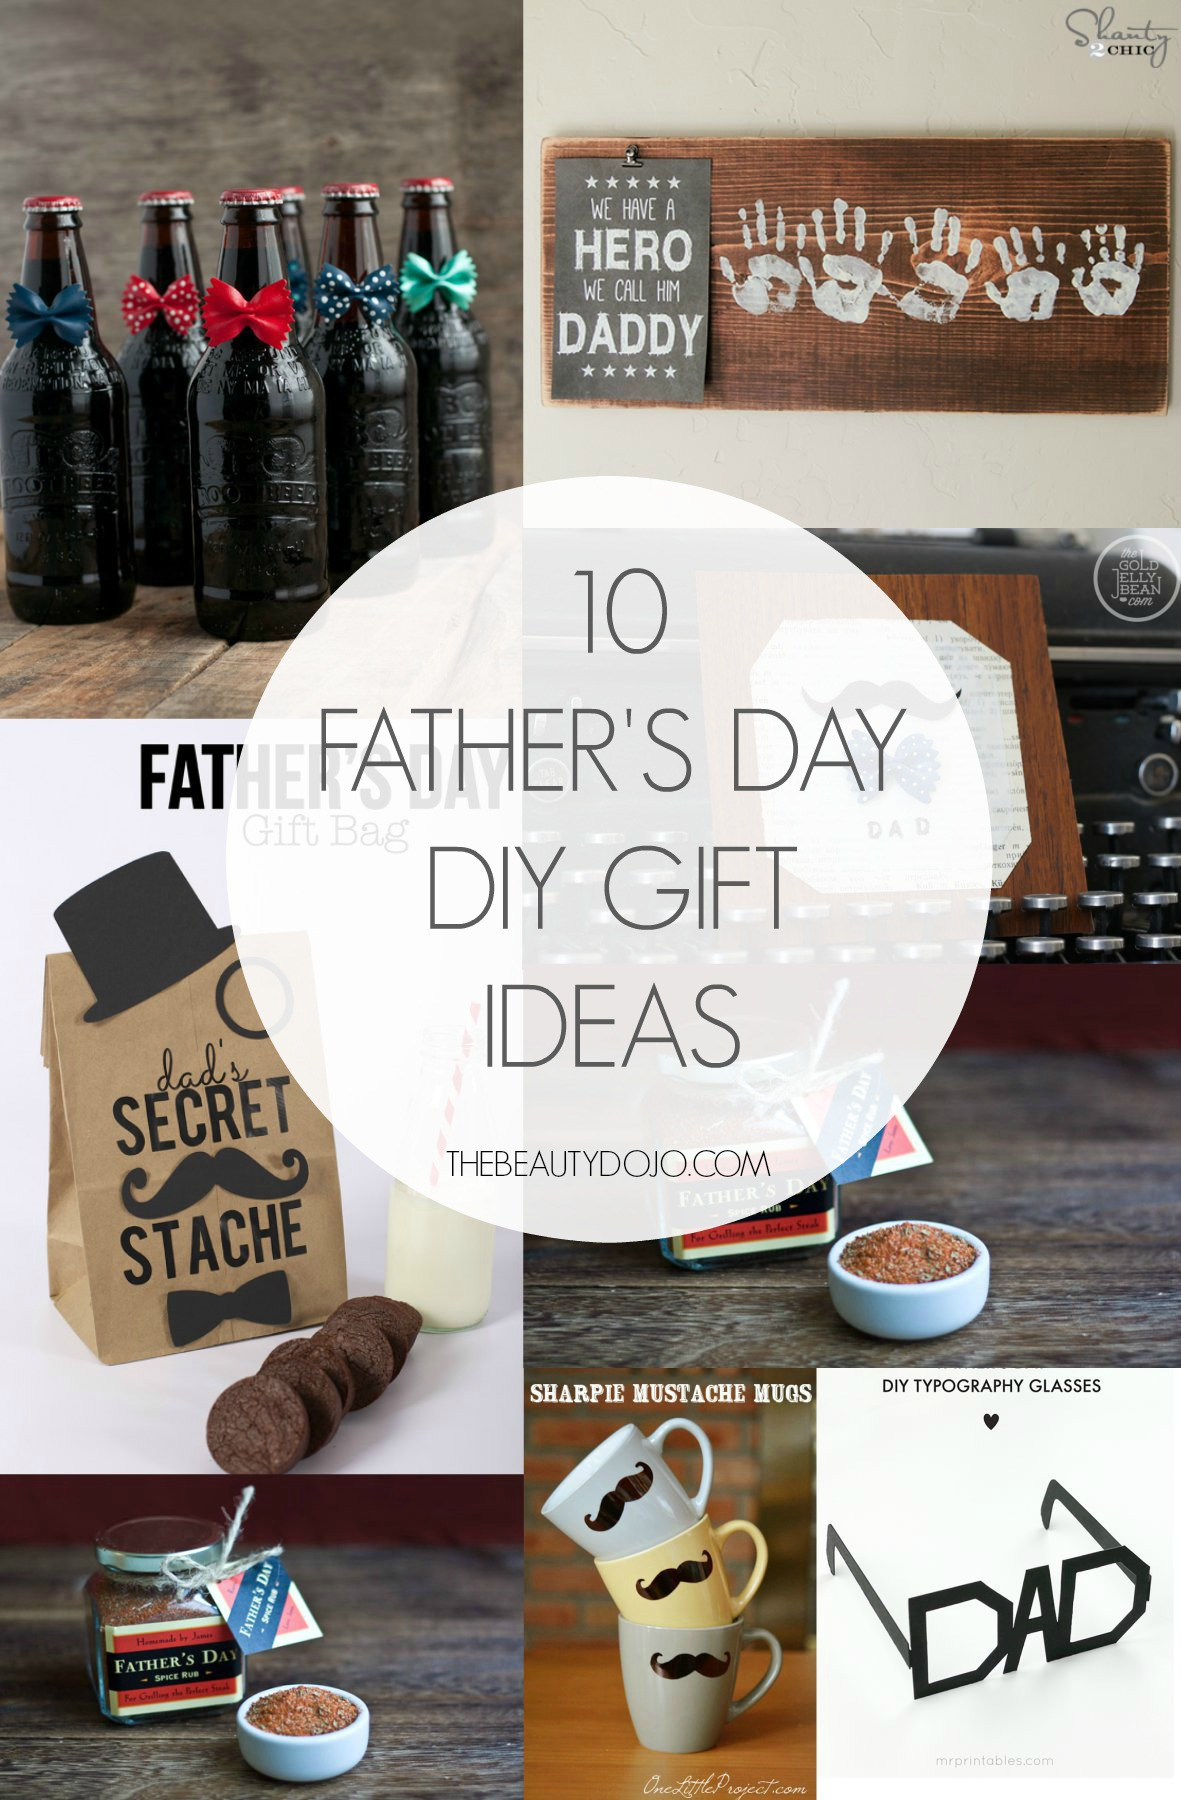 Fathers Day Gift Diy
 10 Father s Day DIY Gift Ideas The Beautydojo